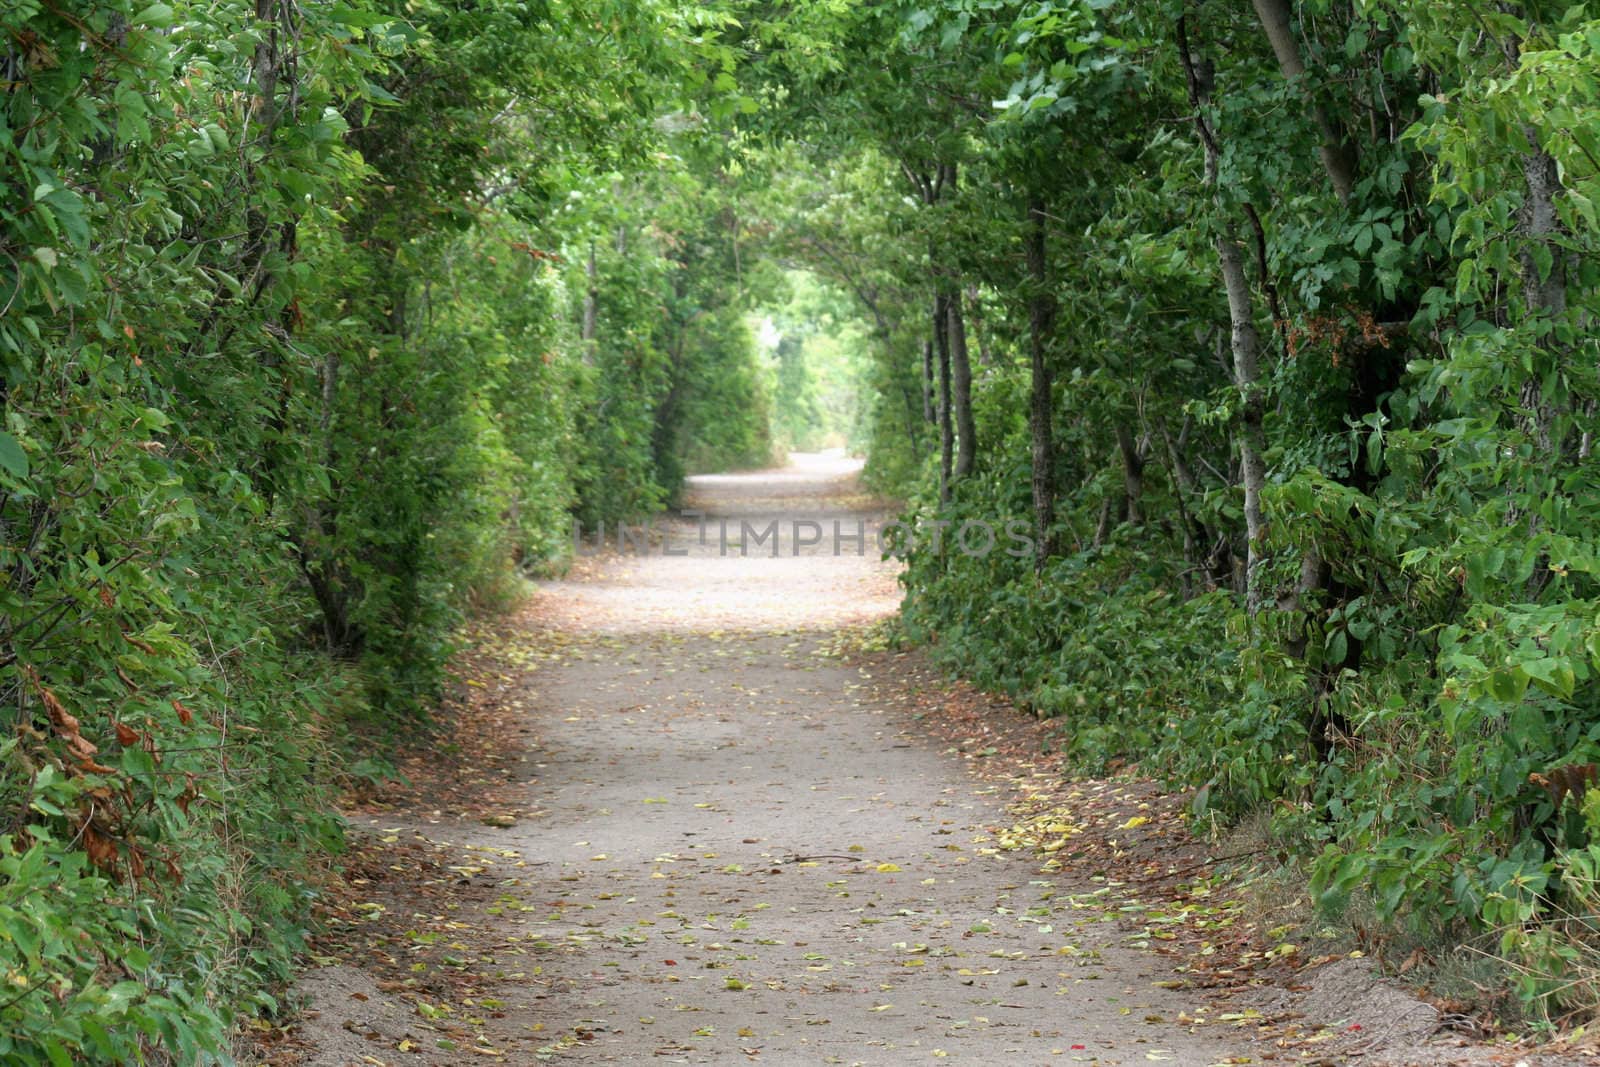 A pathway through a forest forming a tunnel.